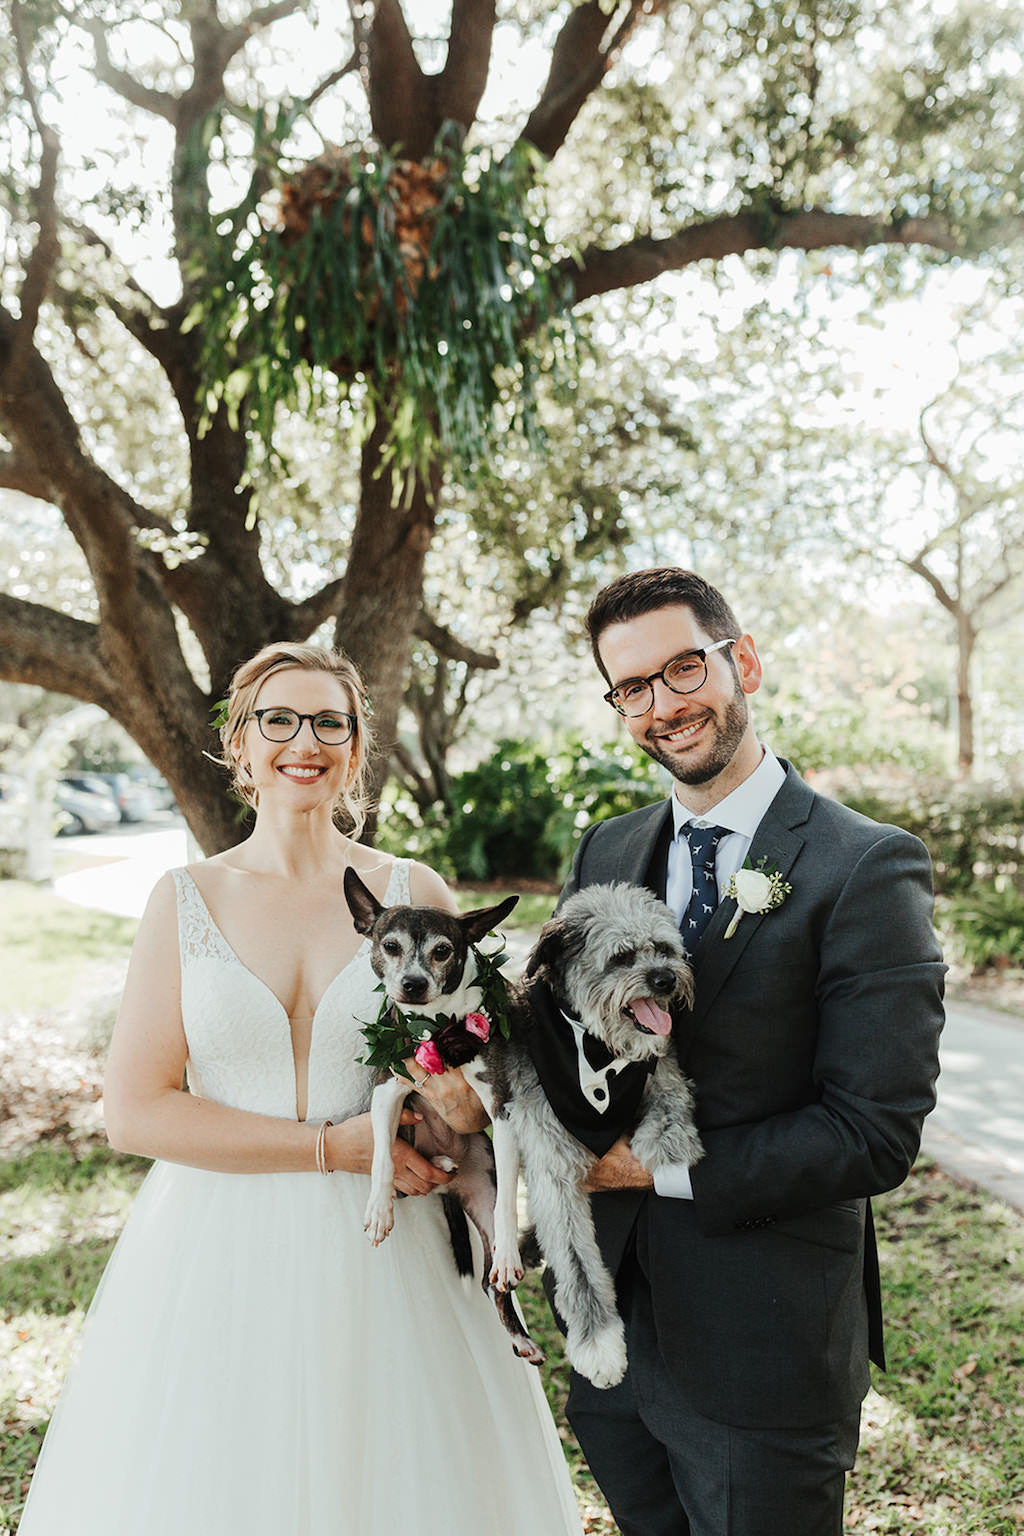 Florida Bride and Groom Wedding Portrait Holding Dogs Wearing Floral Collar and Tuxedo Bandana | Tampa Bay Wedding Pet Sitting Services by FairyTail Pet Care